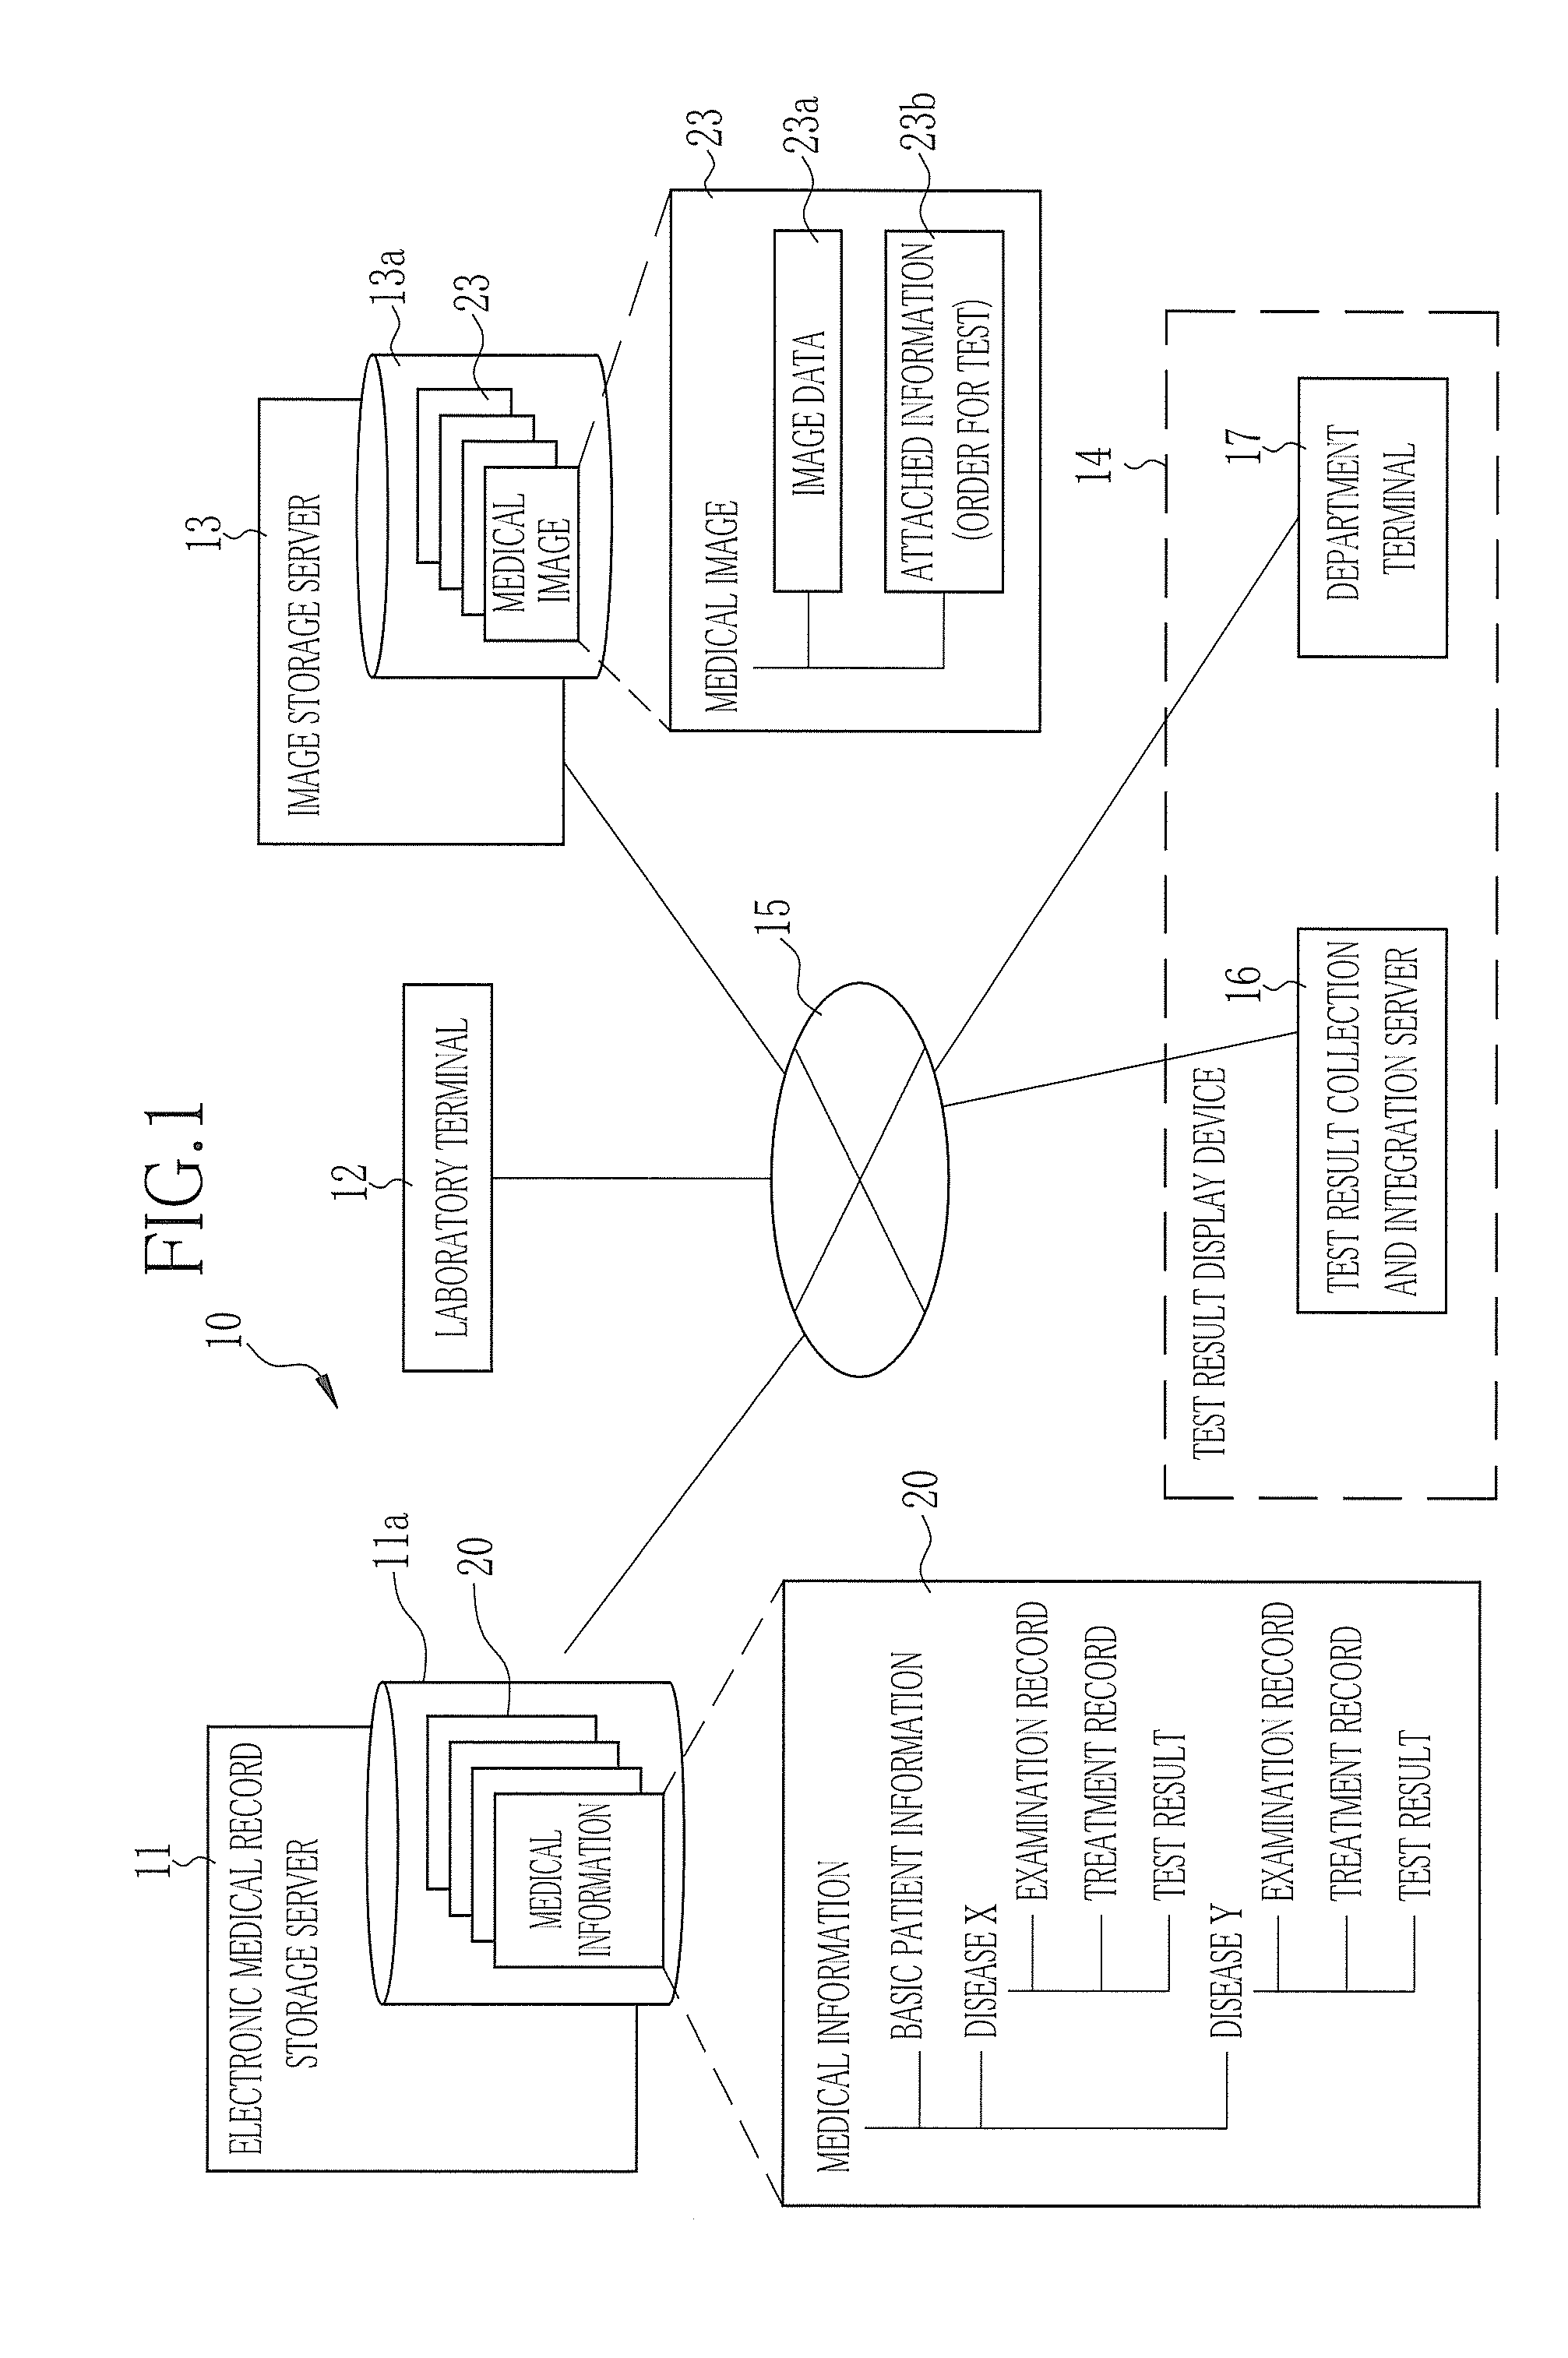 Medical test result display device and method for operating the same